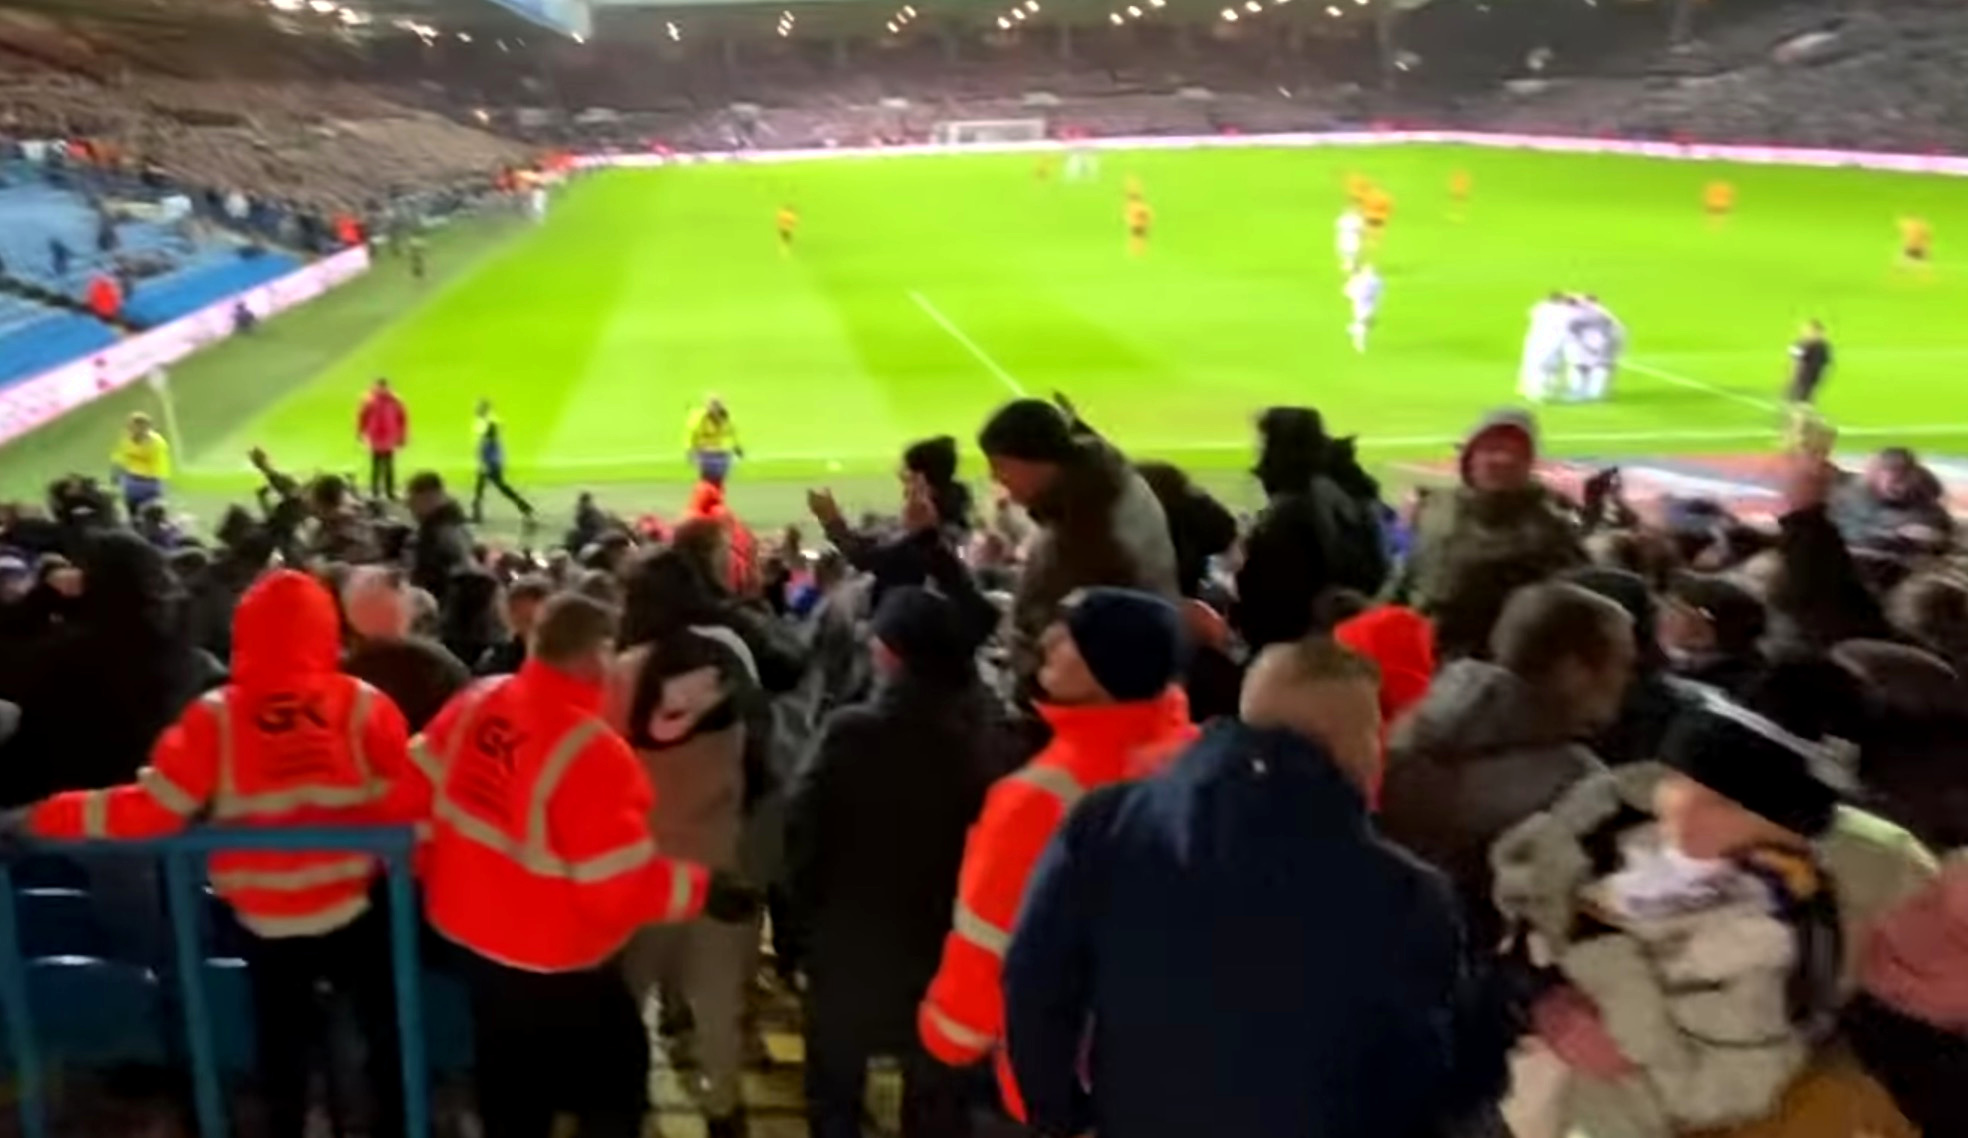 Leeds United  fans caught on cam taking the utter piss out of Hull City’s infamous “mauled by the Tigers” chant